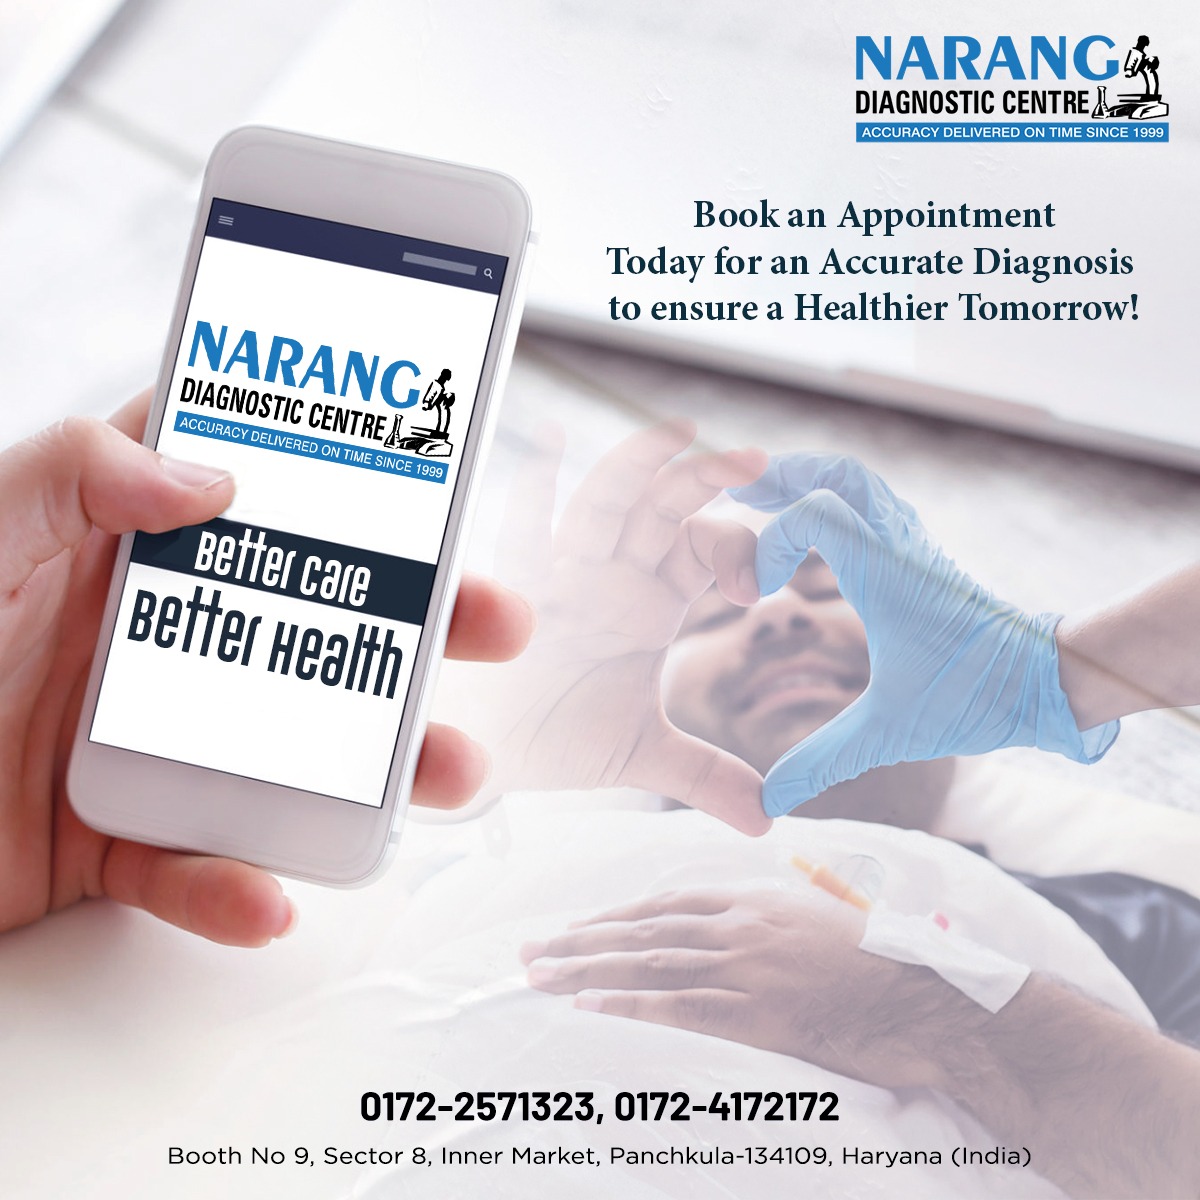 Book an appointment today at #𝗡𝗮𝗿𝗮𝗻𝗴𝗗𝗶𝗮𝗴𝗻𝗼𝘀𝘁𝗶𝗰𝗖𝗲𝗻𝘁𝗿𝗲 for an accurate diagnosis to ensure a healthier tomorrow!

Book Your Test Now!-- 0172-2571323 or 0172-4172172 

#Healthcheckups #Diagnosticcentre #Trusteddiagnosticcentre #Wholebodycheckup #Healthpackage